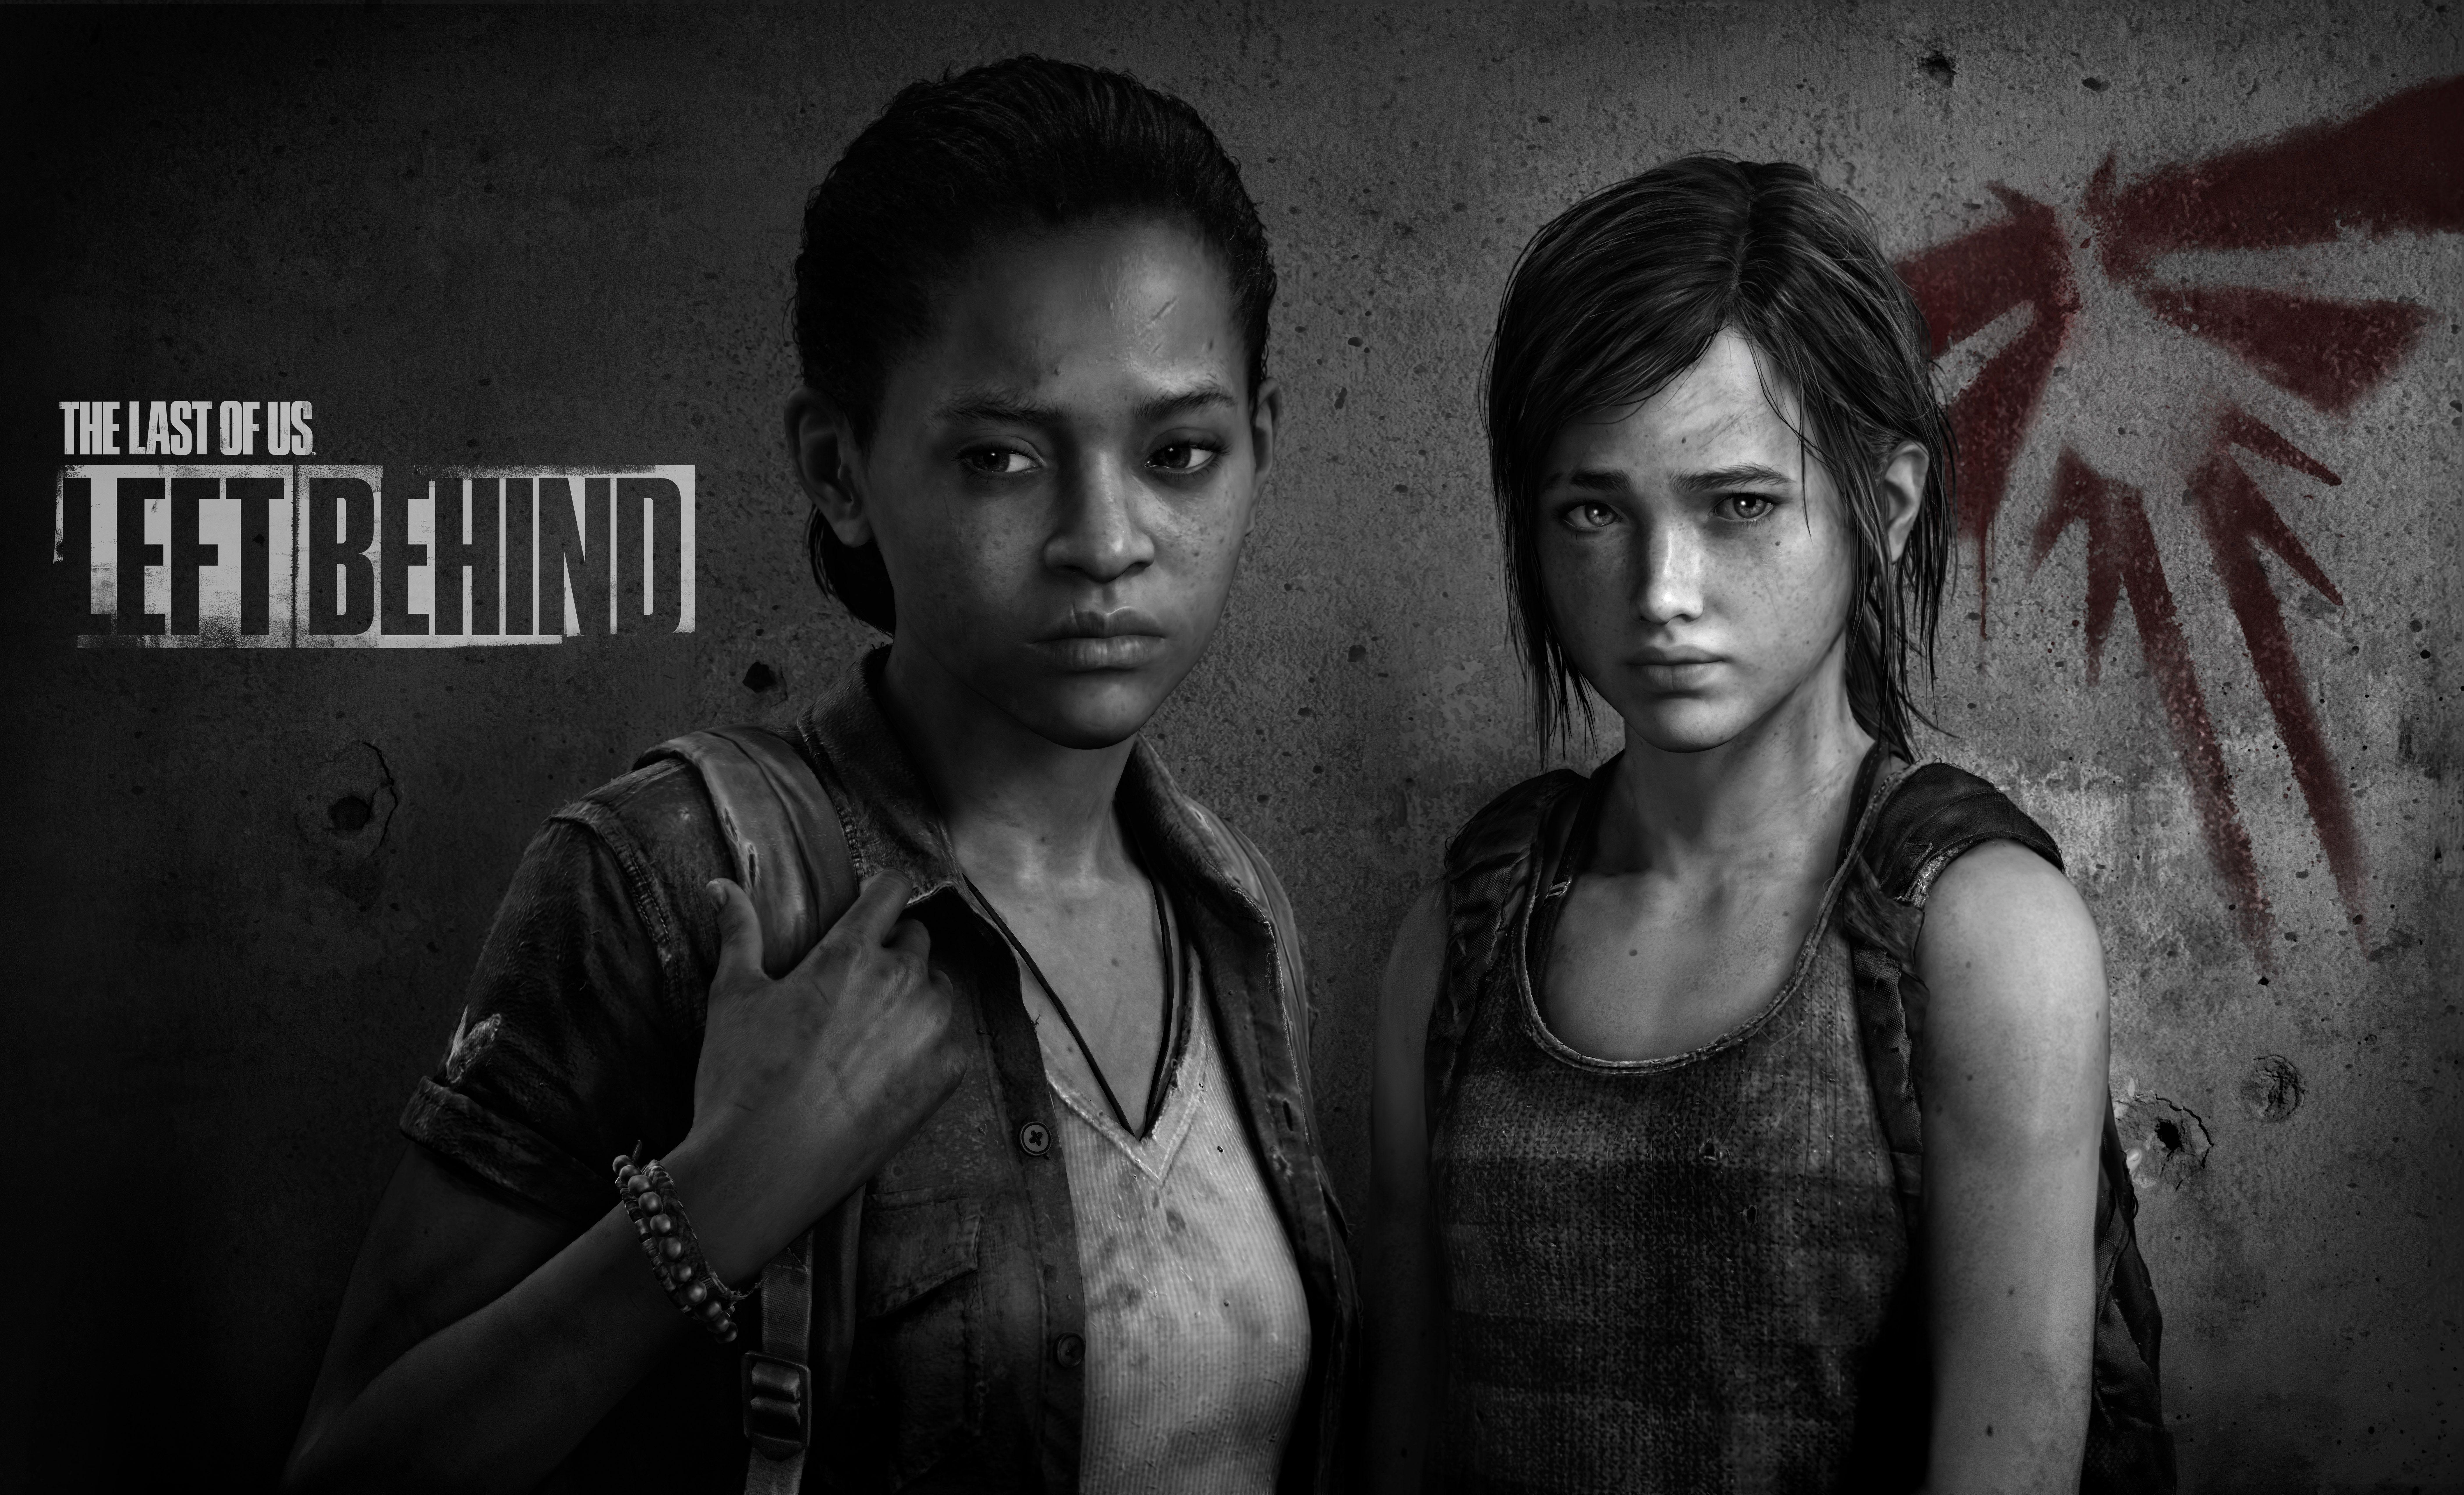 344320 Ellie, The Last of Us Part 2, The Last of Us Part II, TLOU, TLOU2,  Video Game 4k - Rare Gallery HD Wallpapers